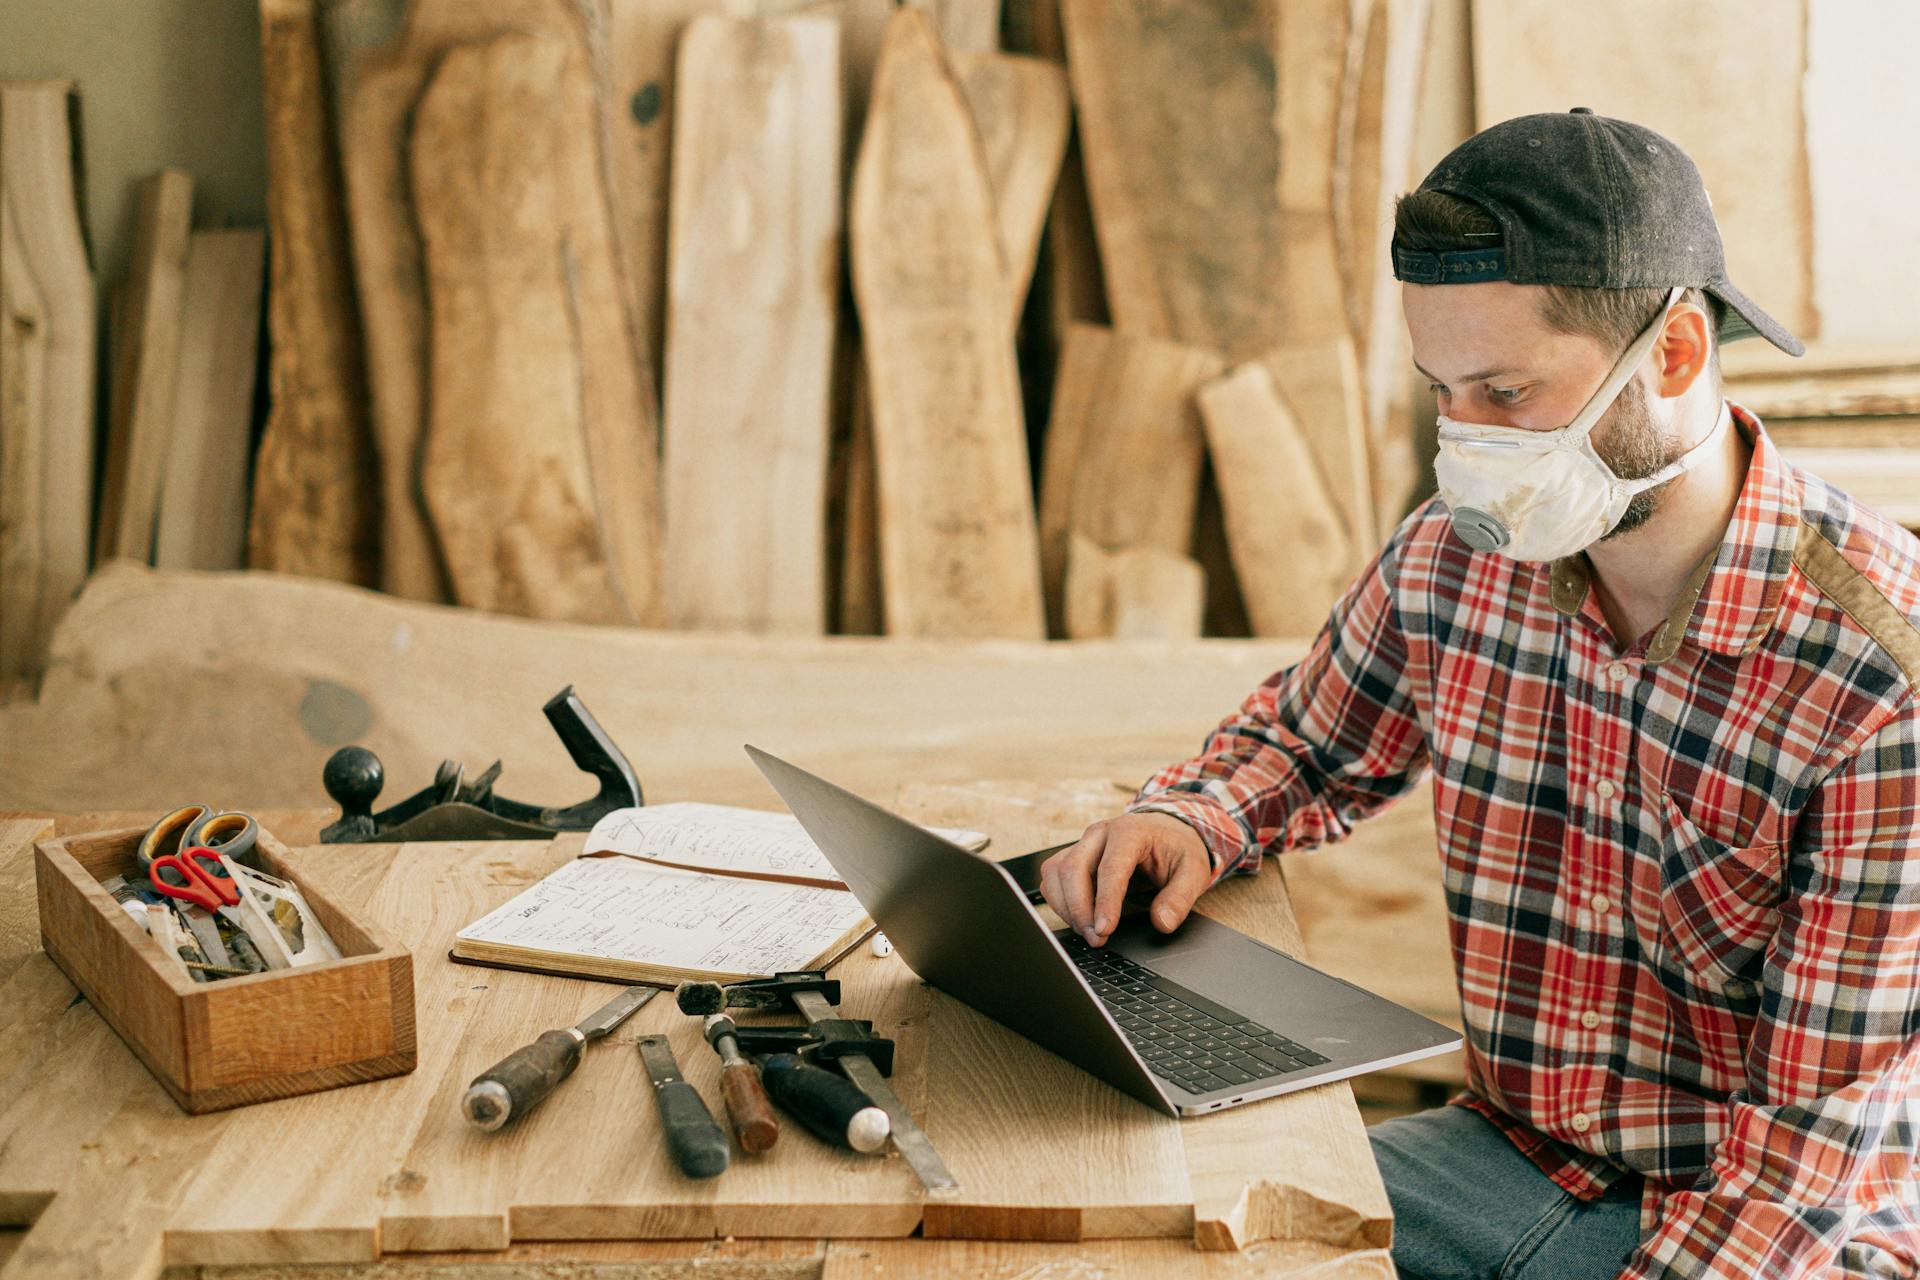 A man using a laptop in a wood workshop | Source: Pexels